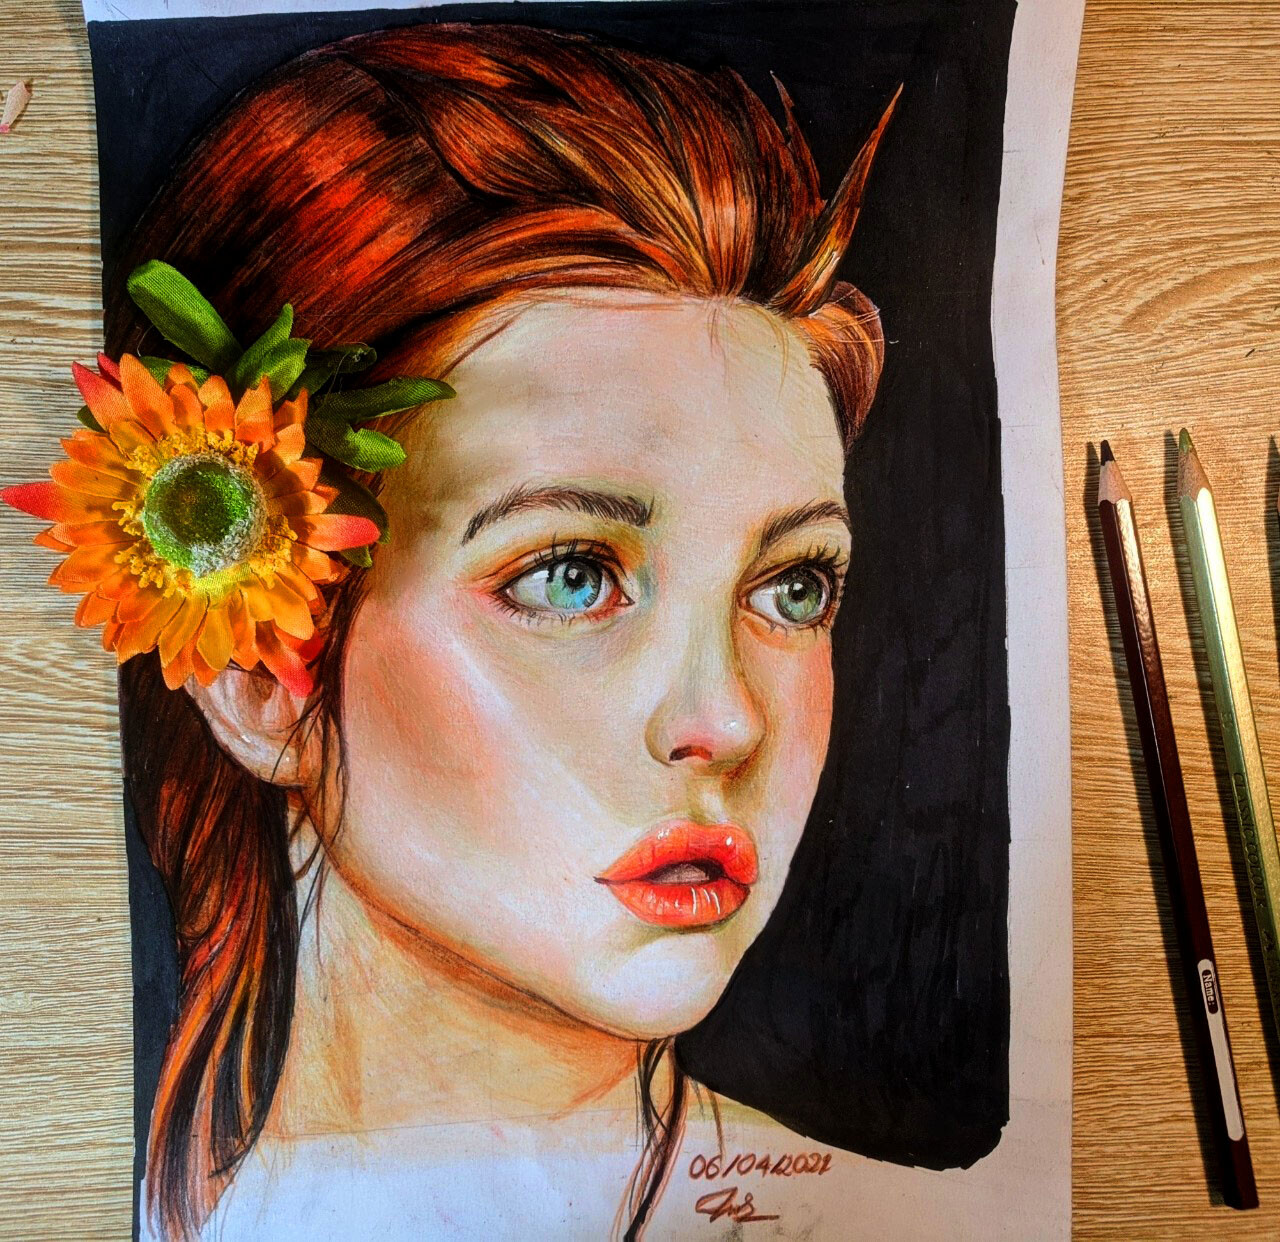 How to draw a portrait with coloured pencils - Artists & Illustrators